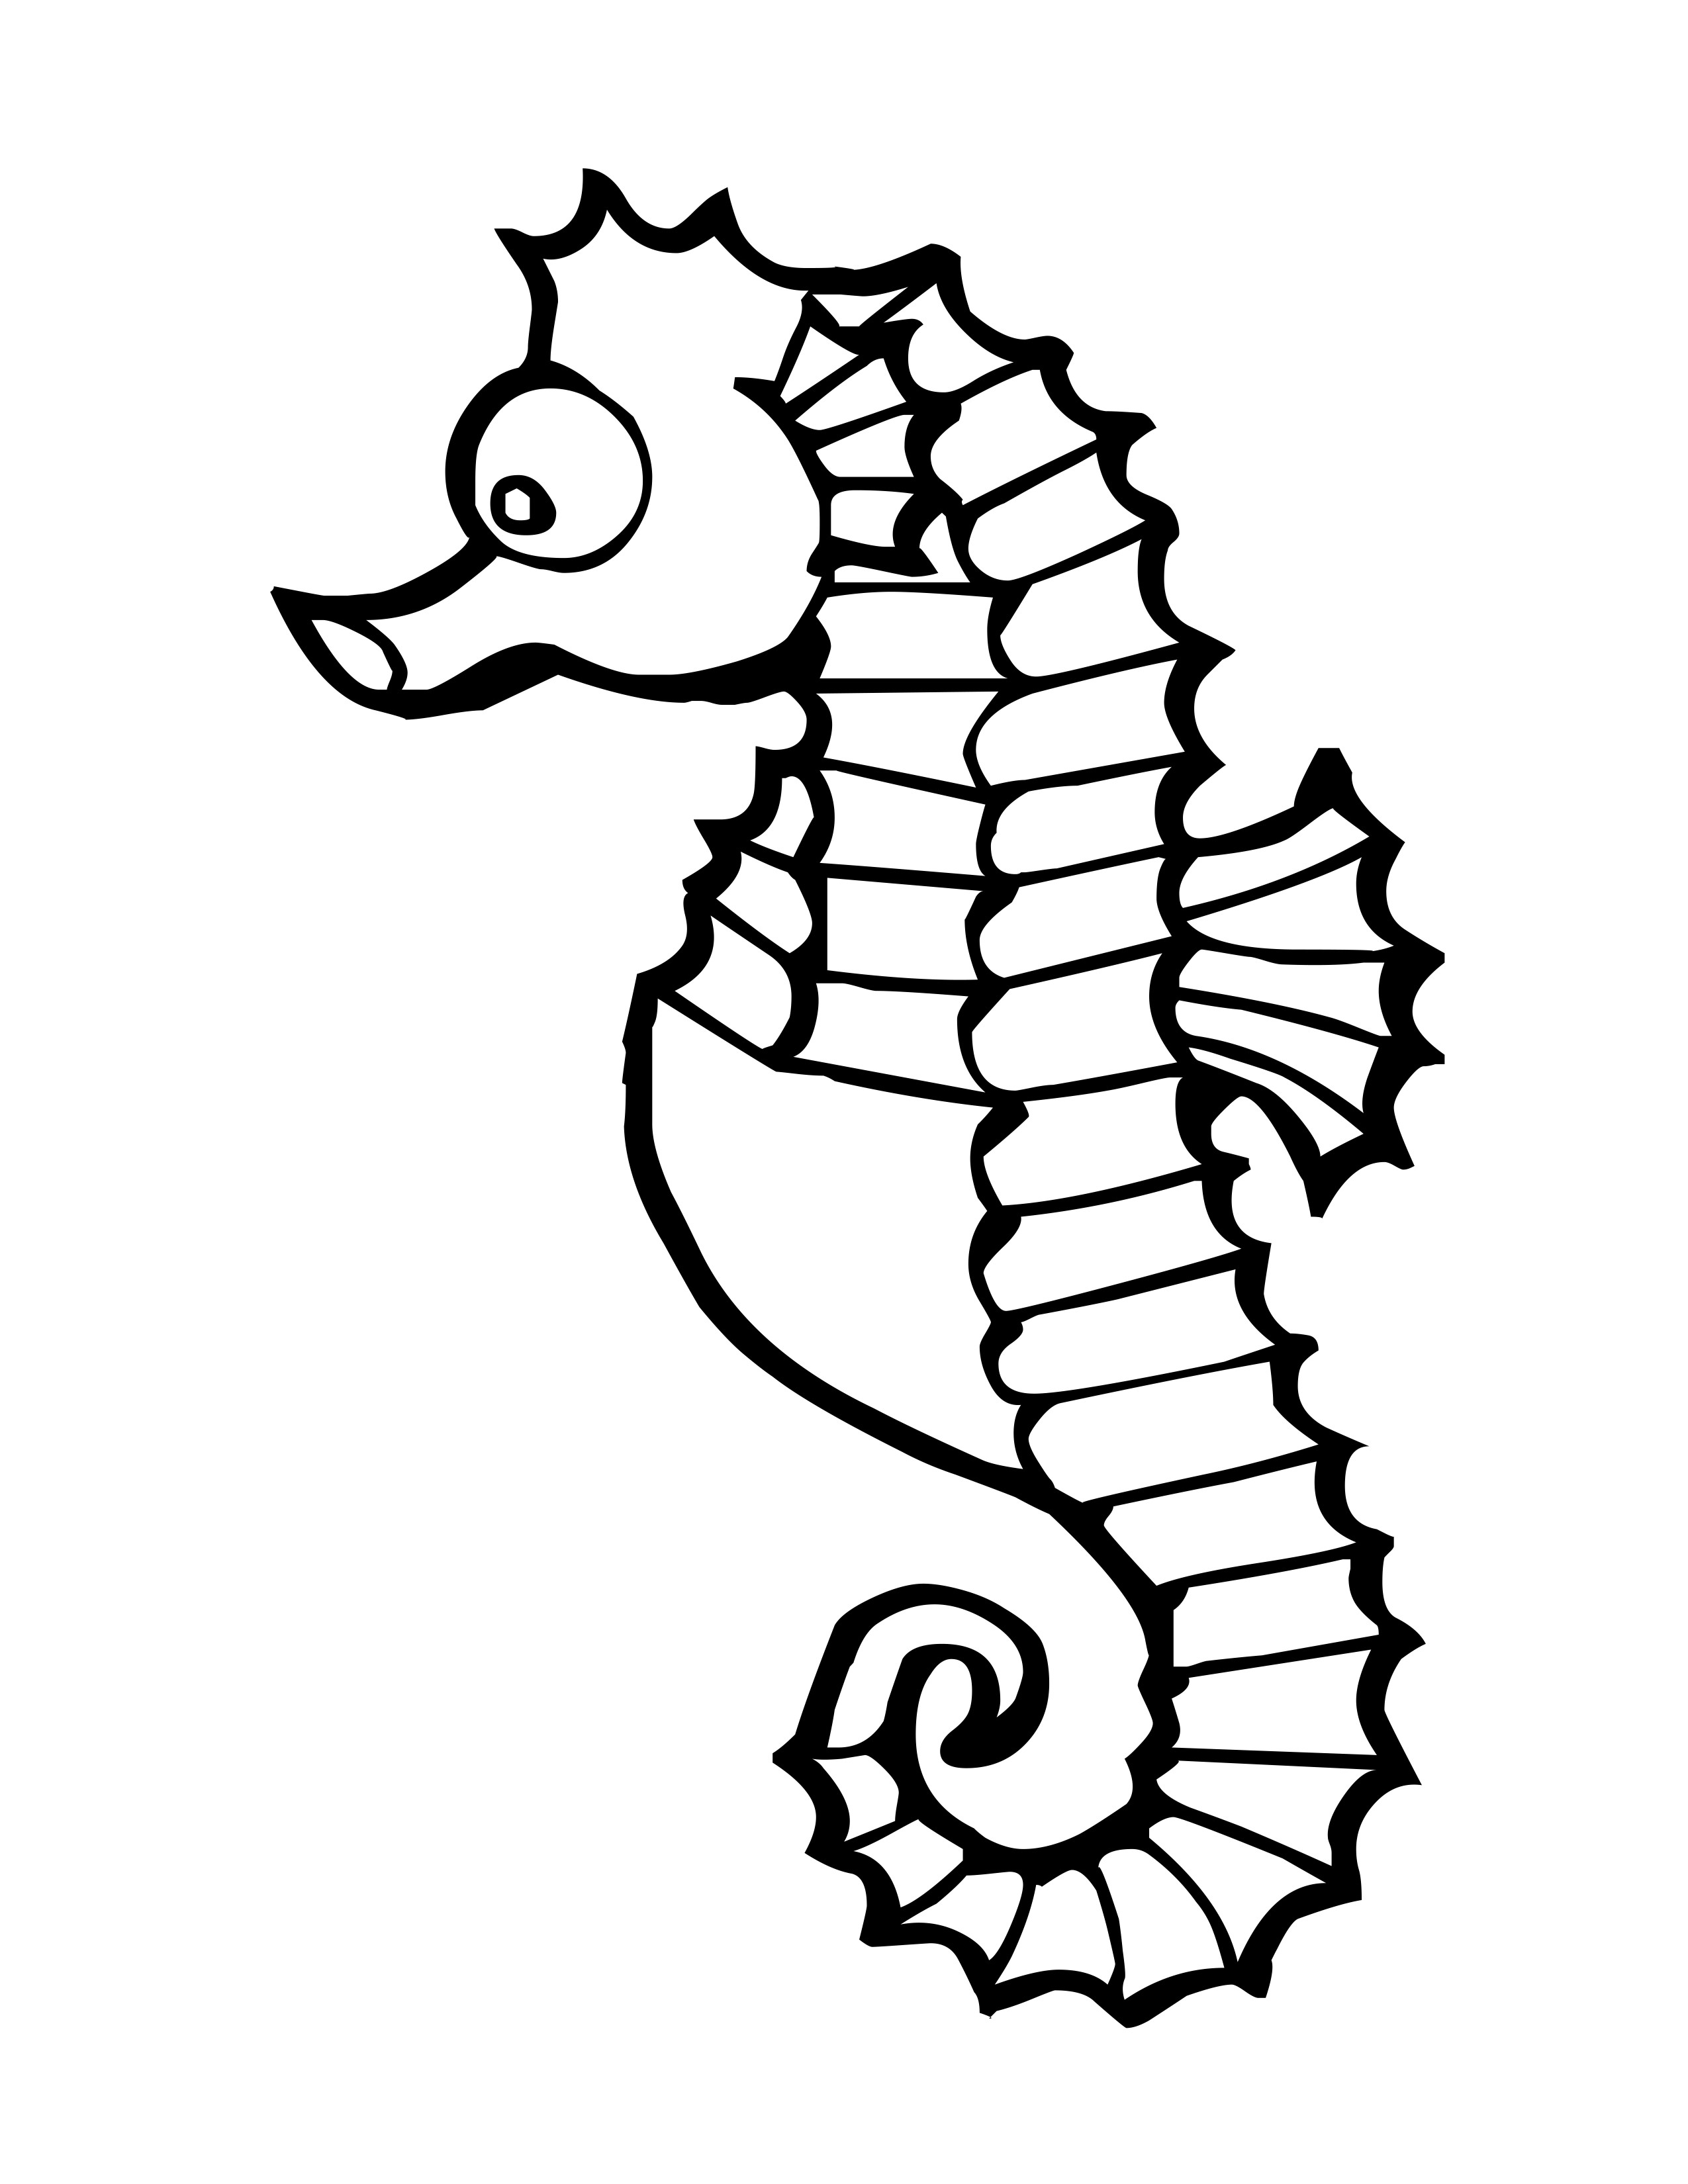 Drawing Marine Animals #22132 (Animals) – Printable coloring pages